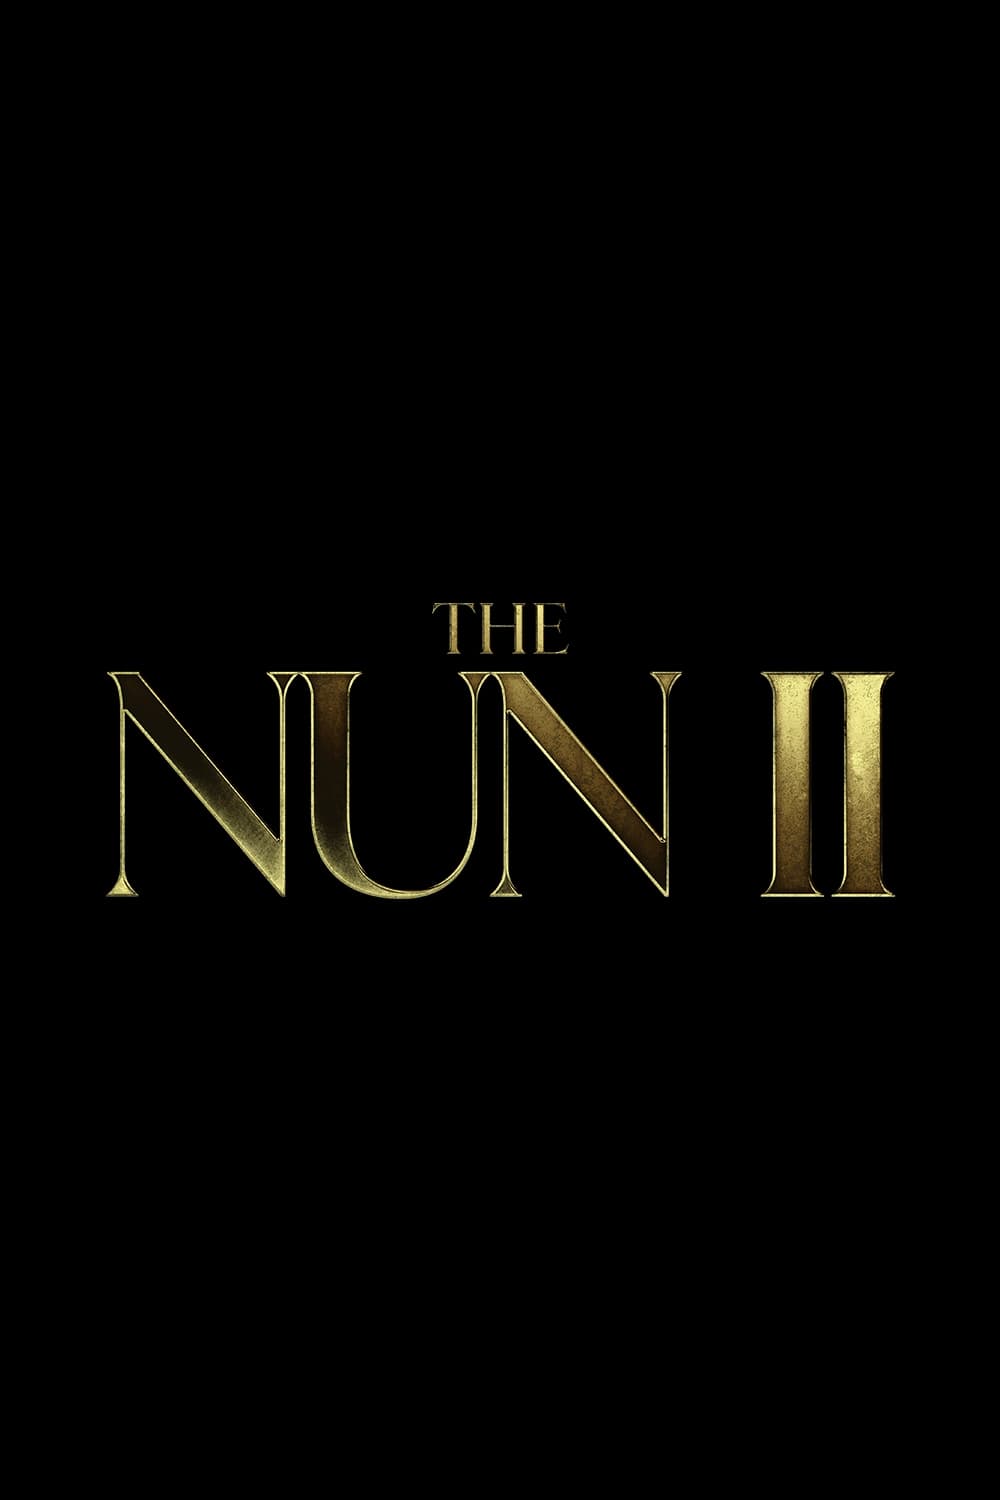 Poster for the movie "The Nun II"